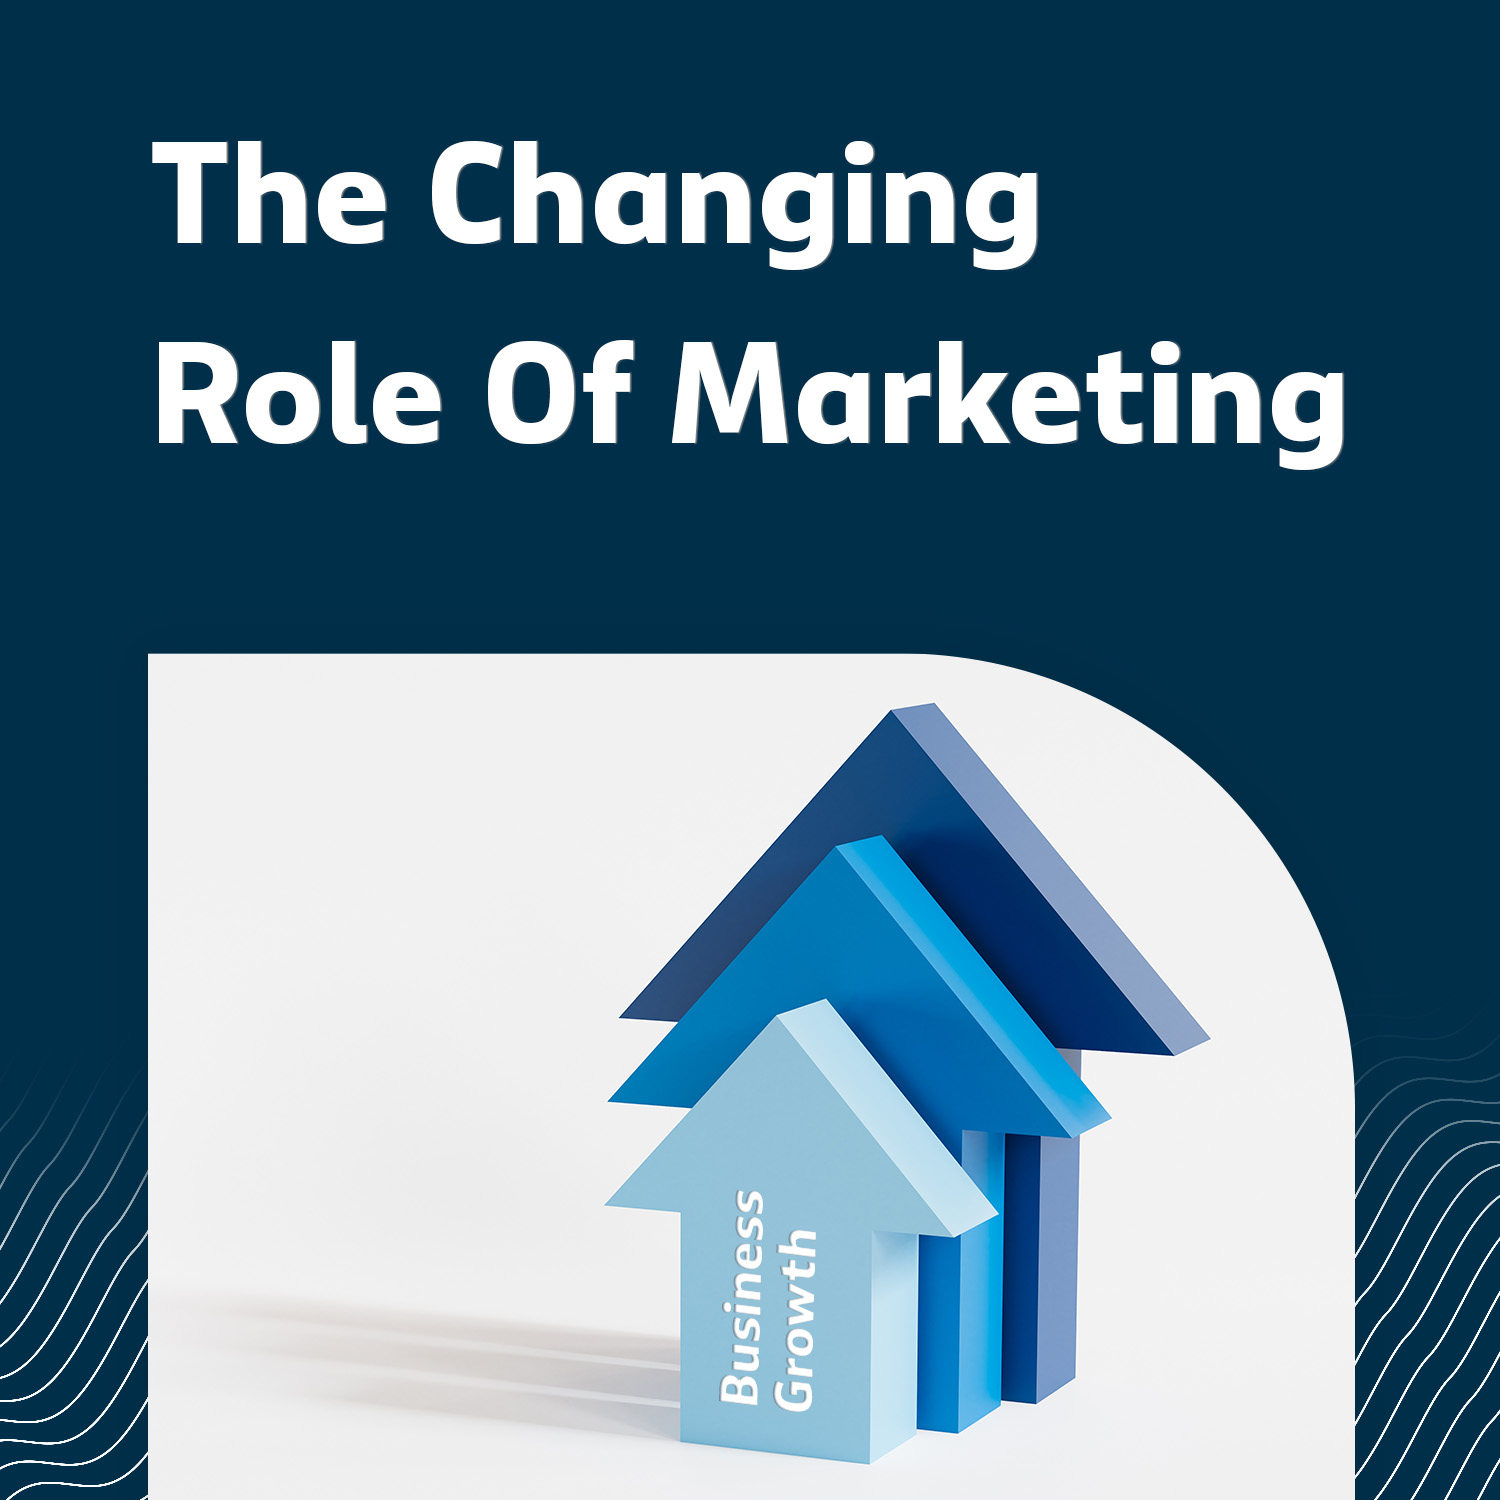 Changing role of marketing